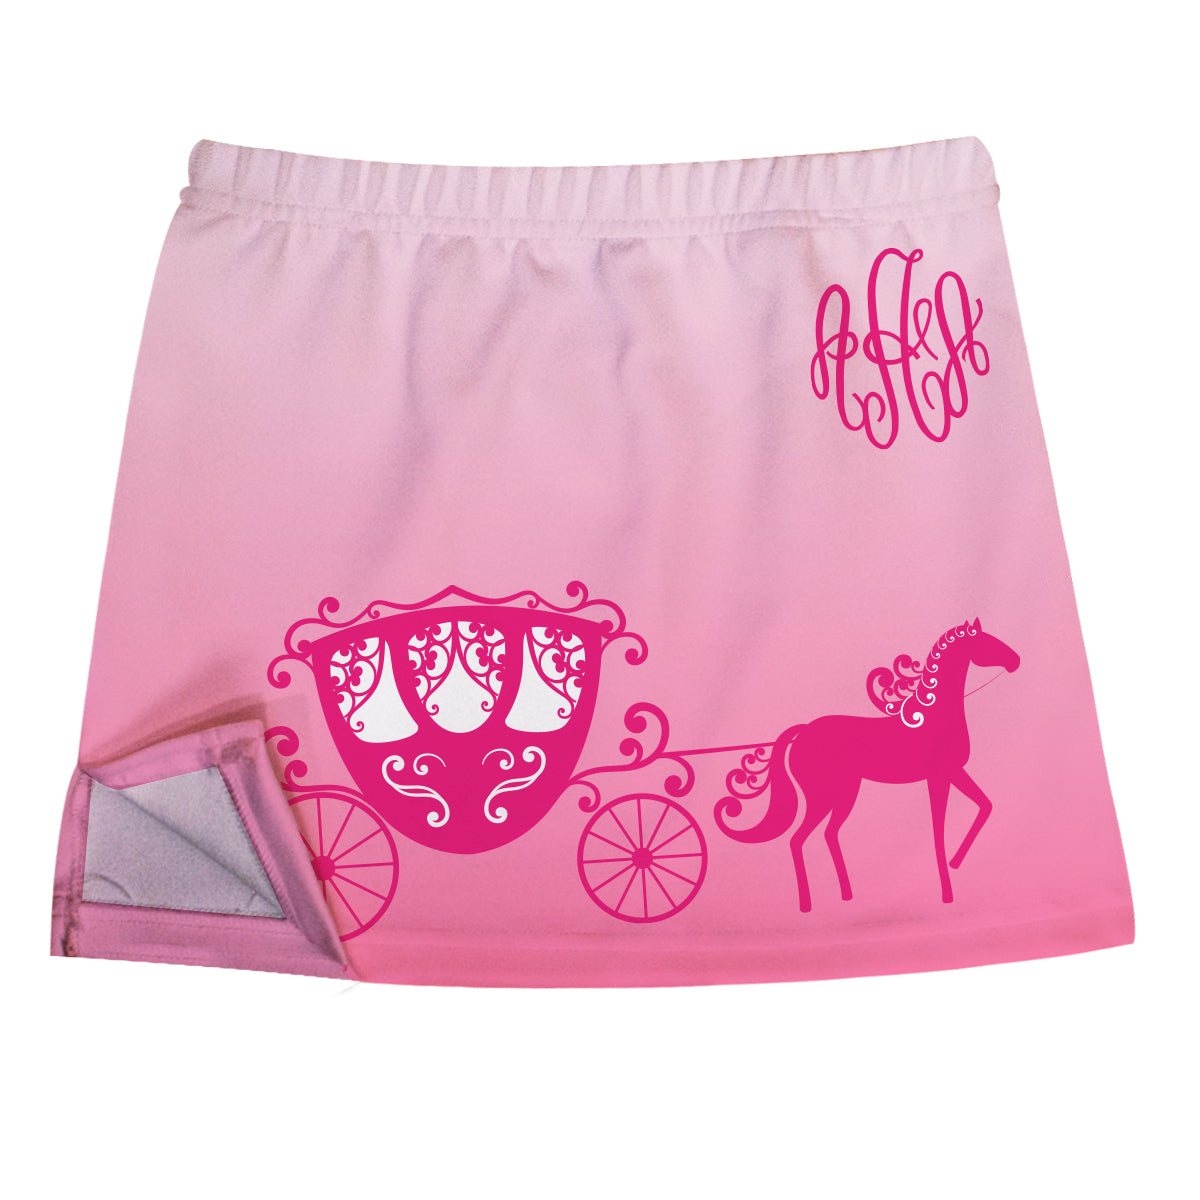 Carriage Personalized Monogram Pink Degrade Skirt With Side Vents - Wimziy&Co.